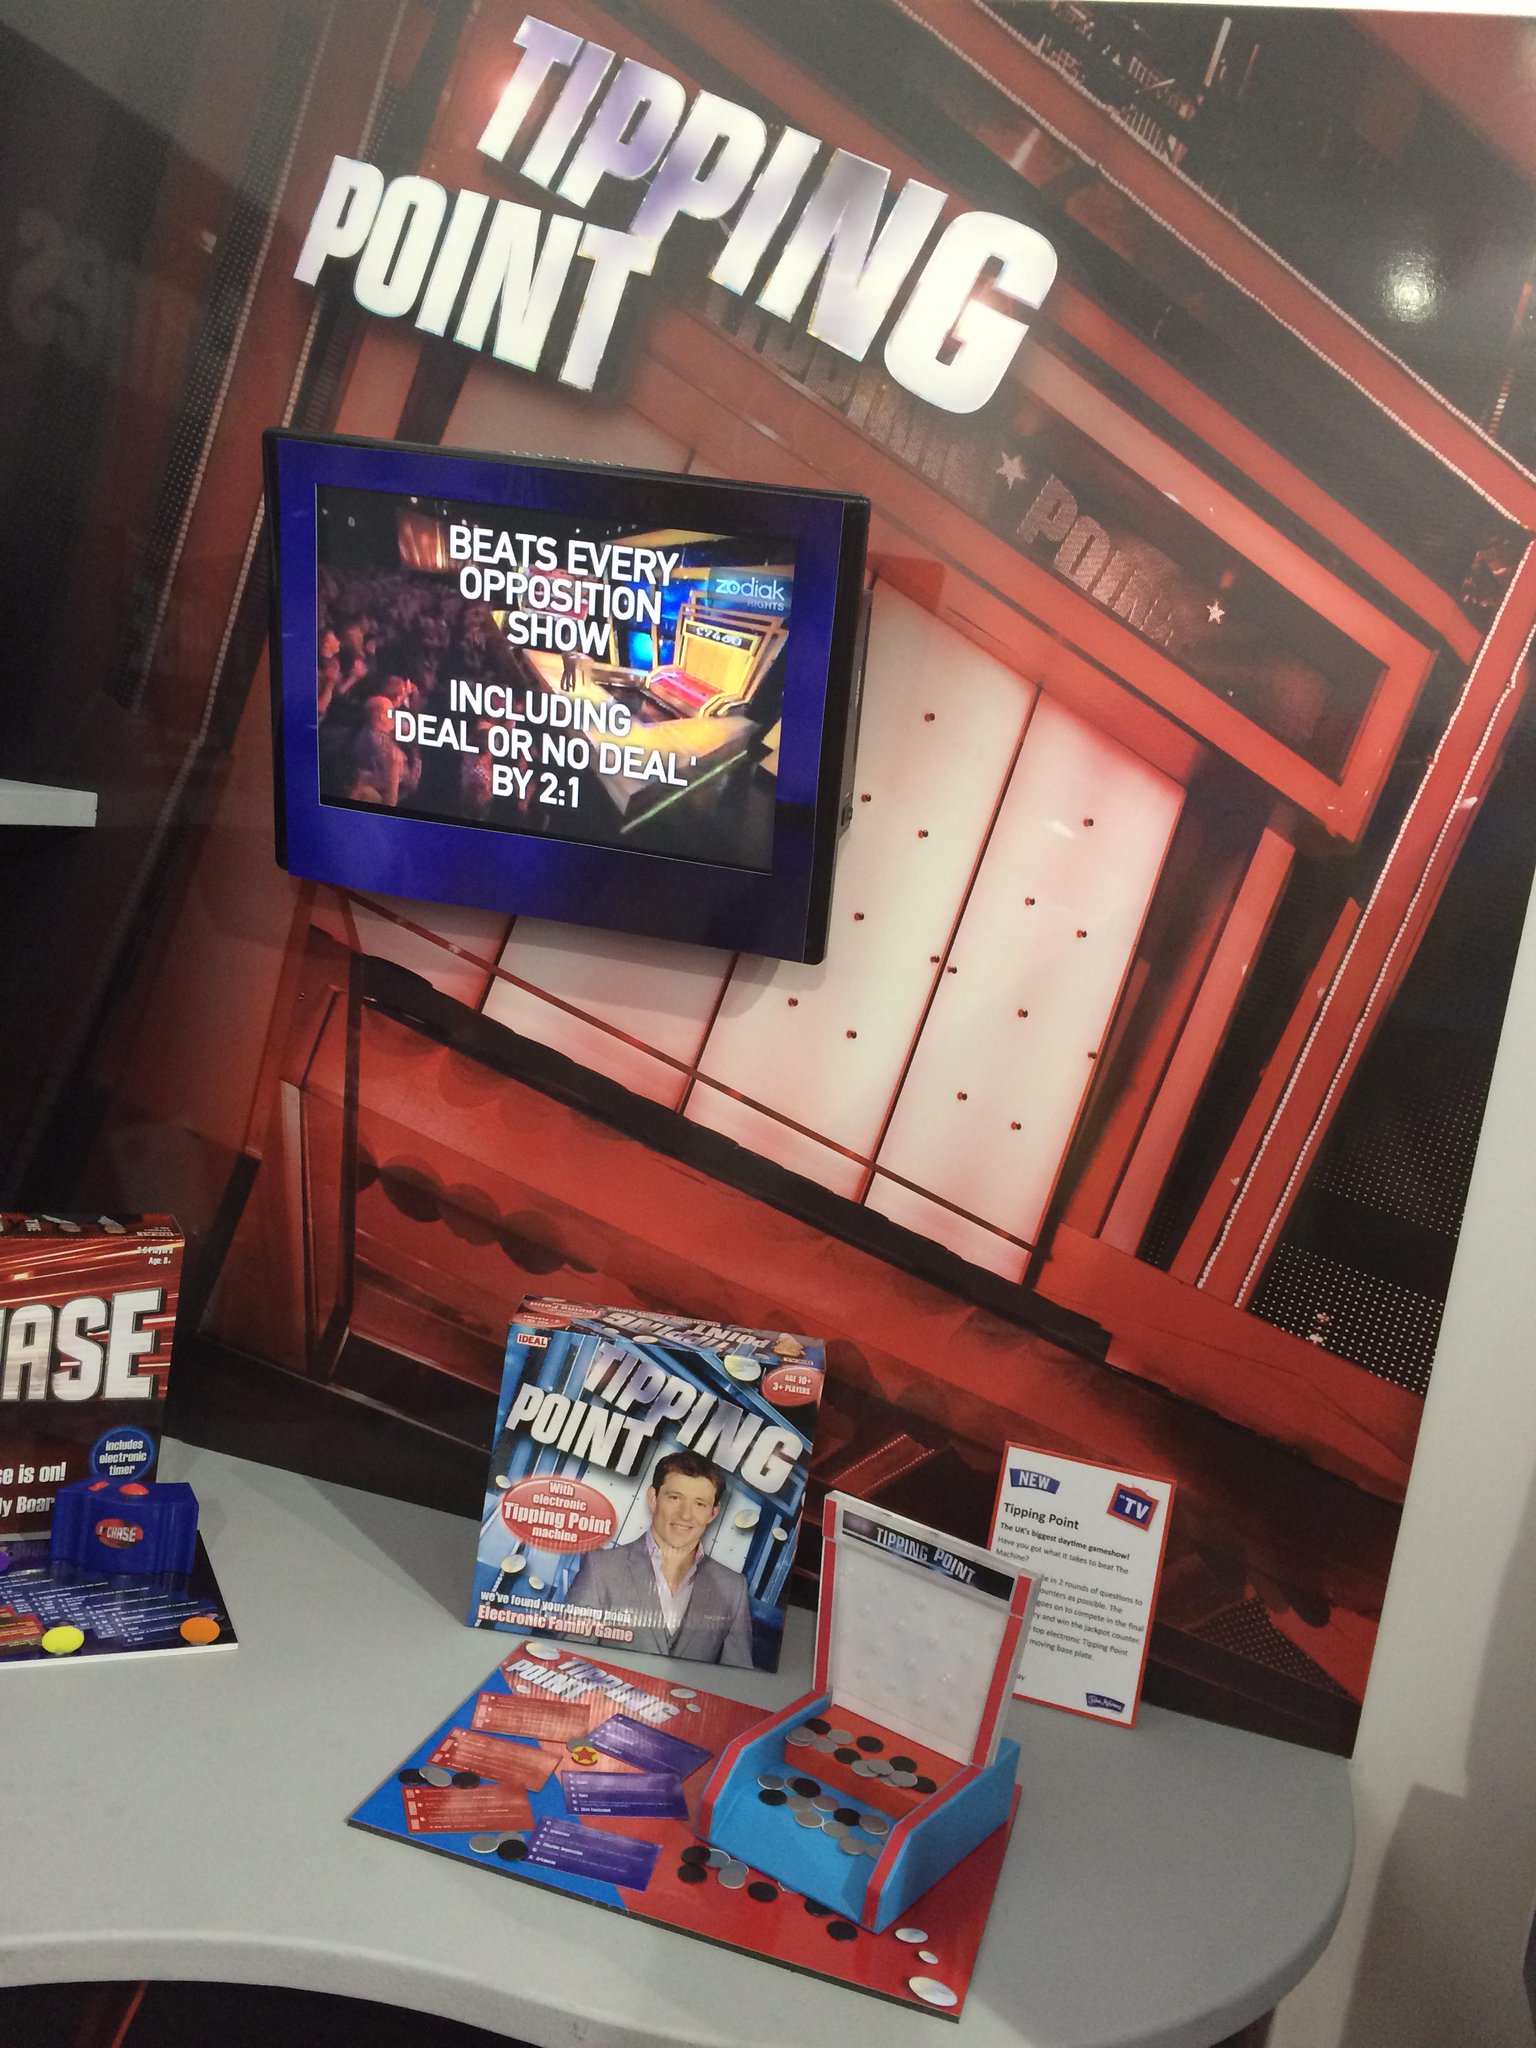 Banijay Rights on Twitter: "Brand new Tipping Point board game on show